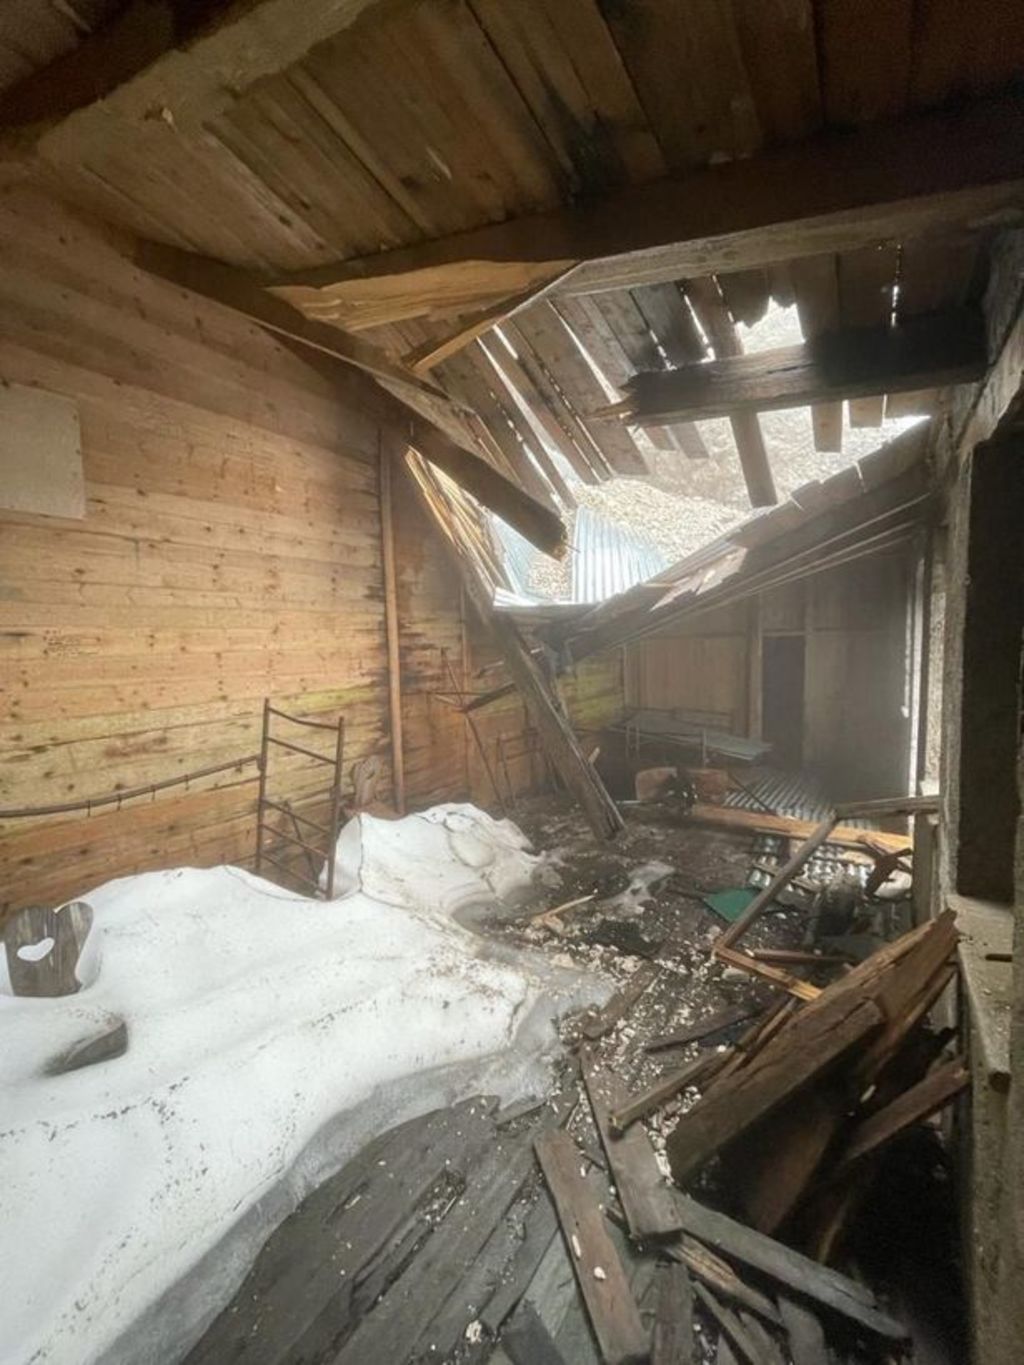 More than 100 years after the shelter was believed to have been constructed by Italian World War I soldiers, the roof has given way. Photo: Mountain Rescue Team Cortina d'Ampezzo